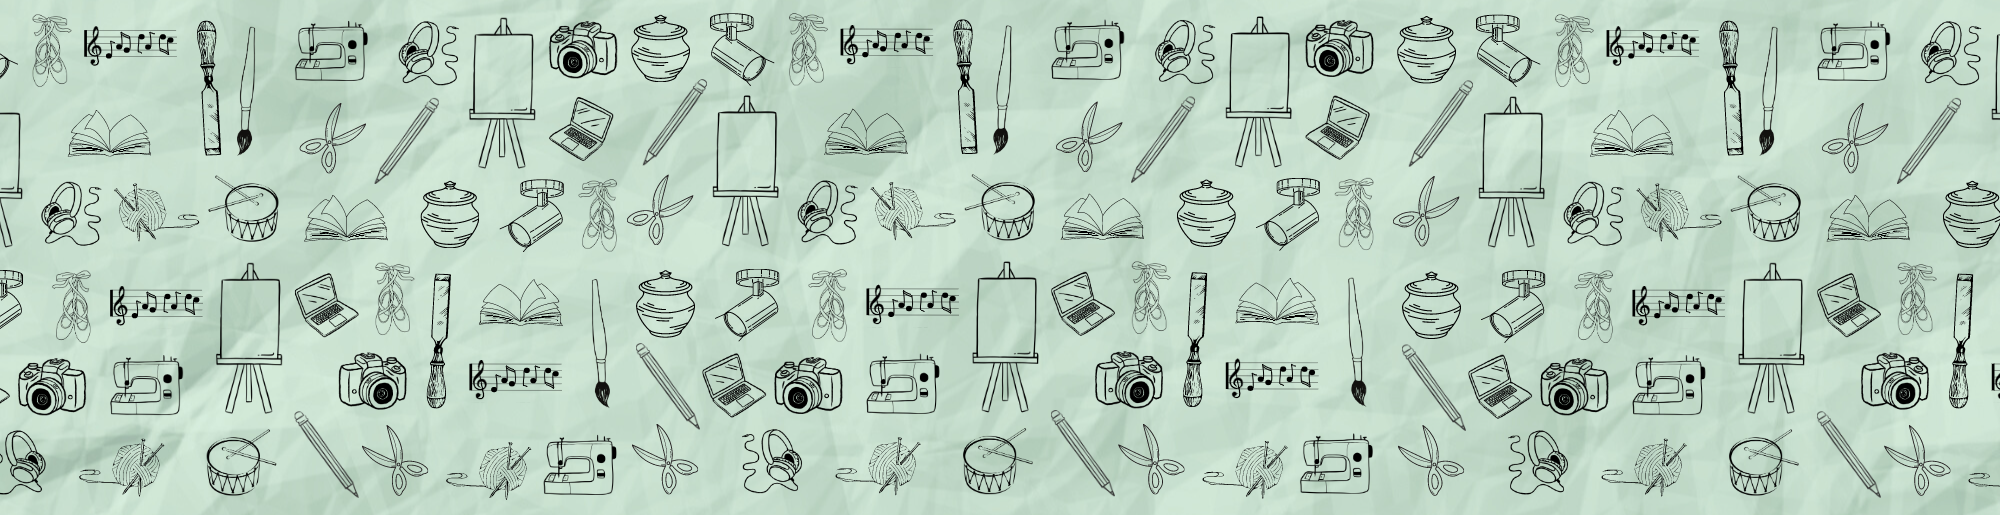 Graphic of creative tools